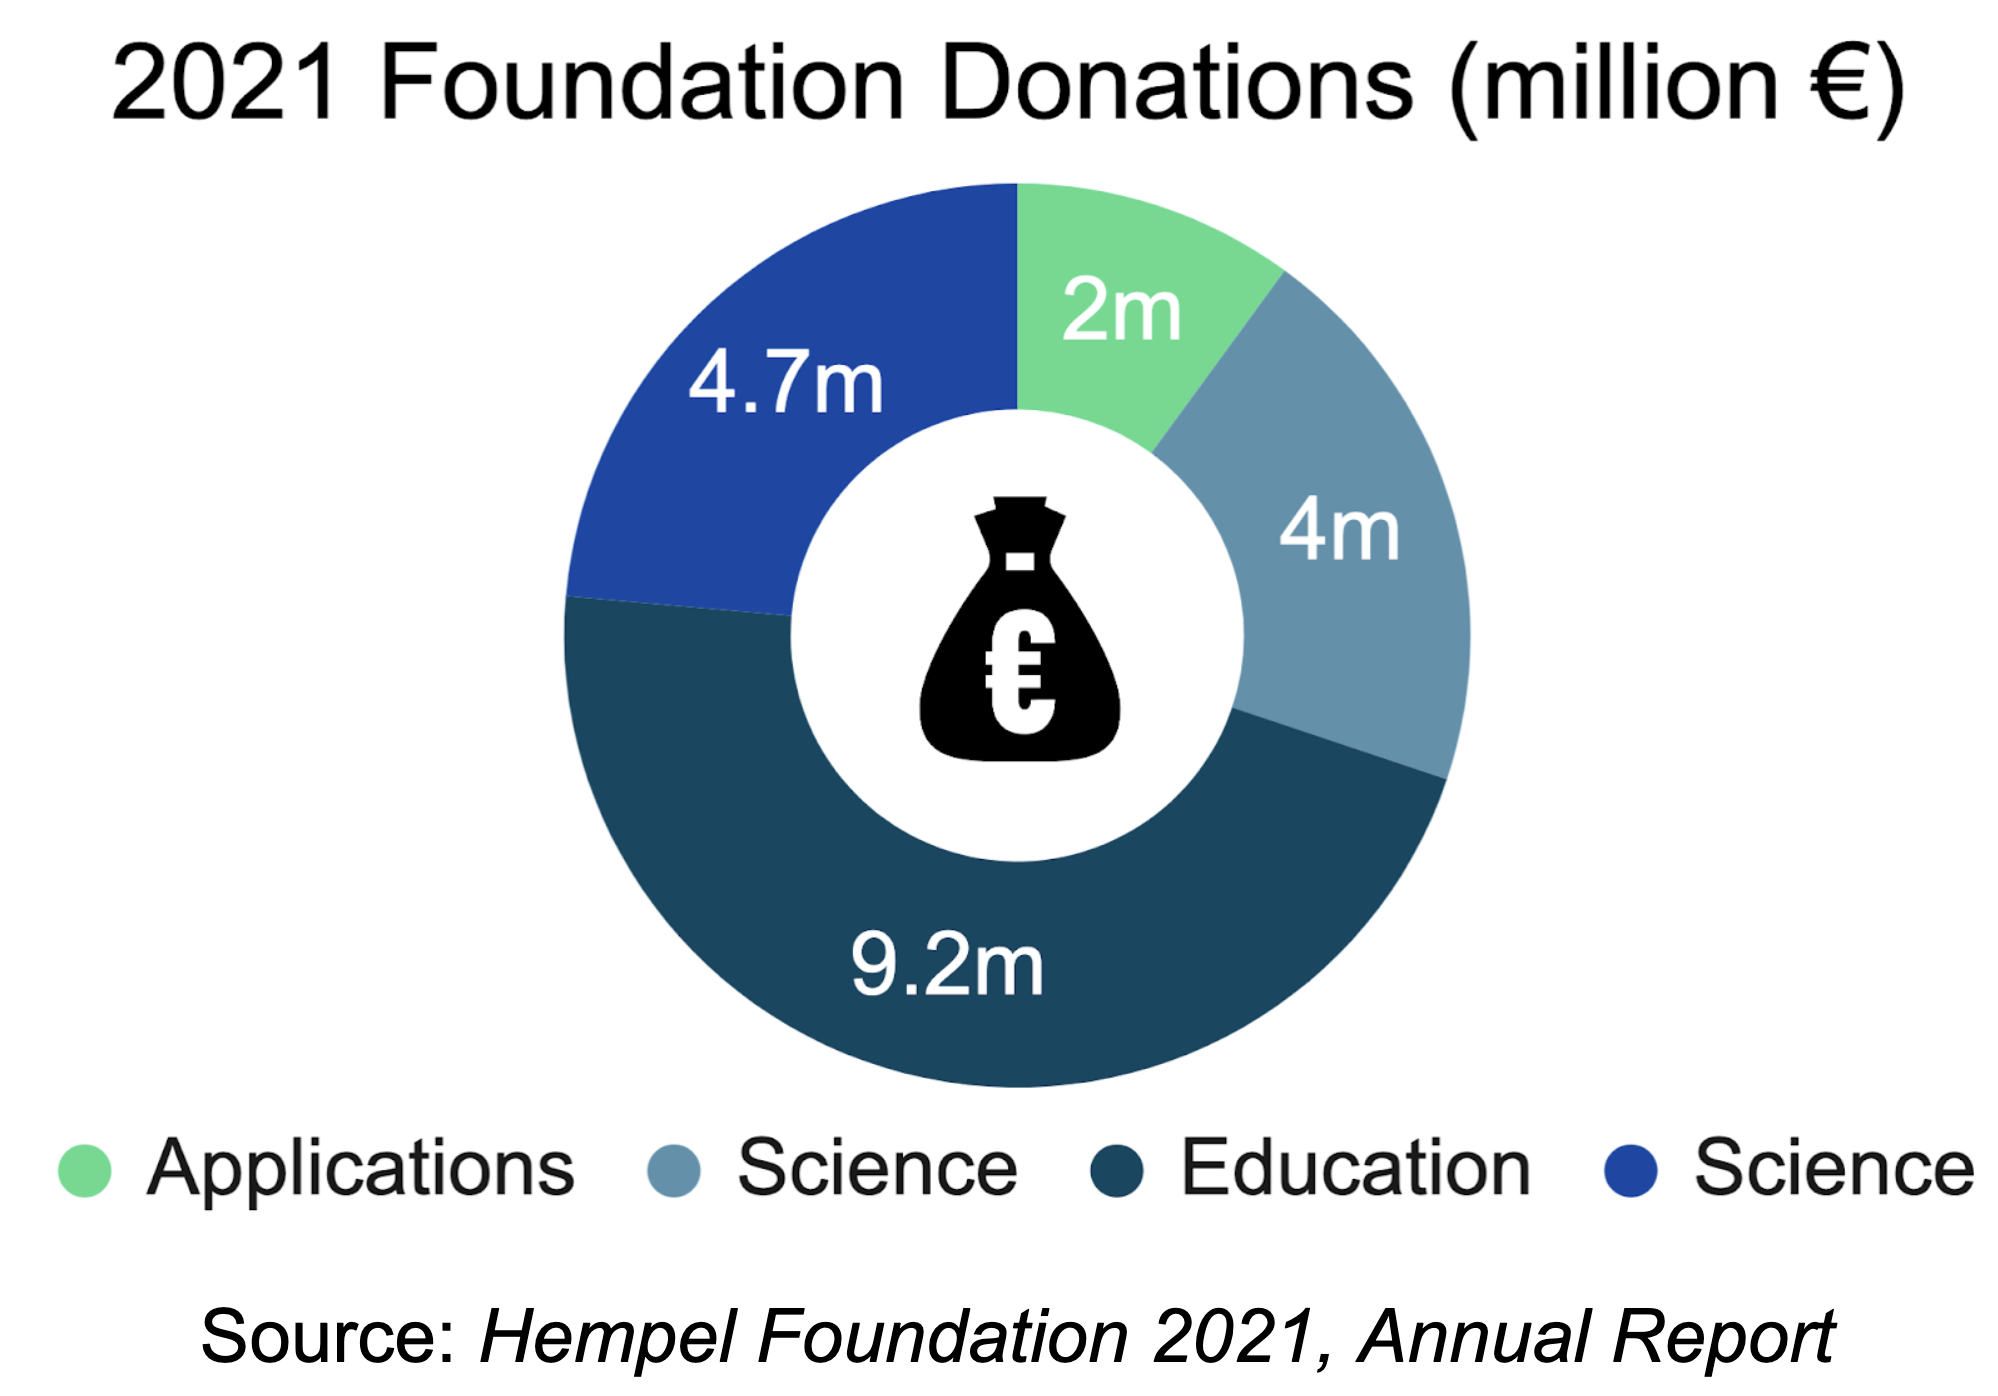 The Hempel Foundation: A Potential Partner For Your Organization